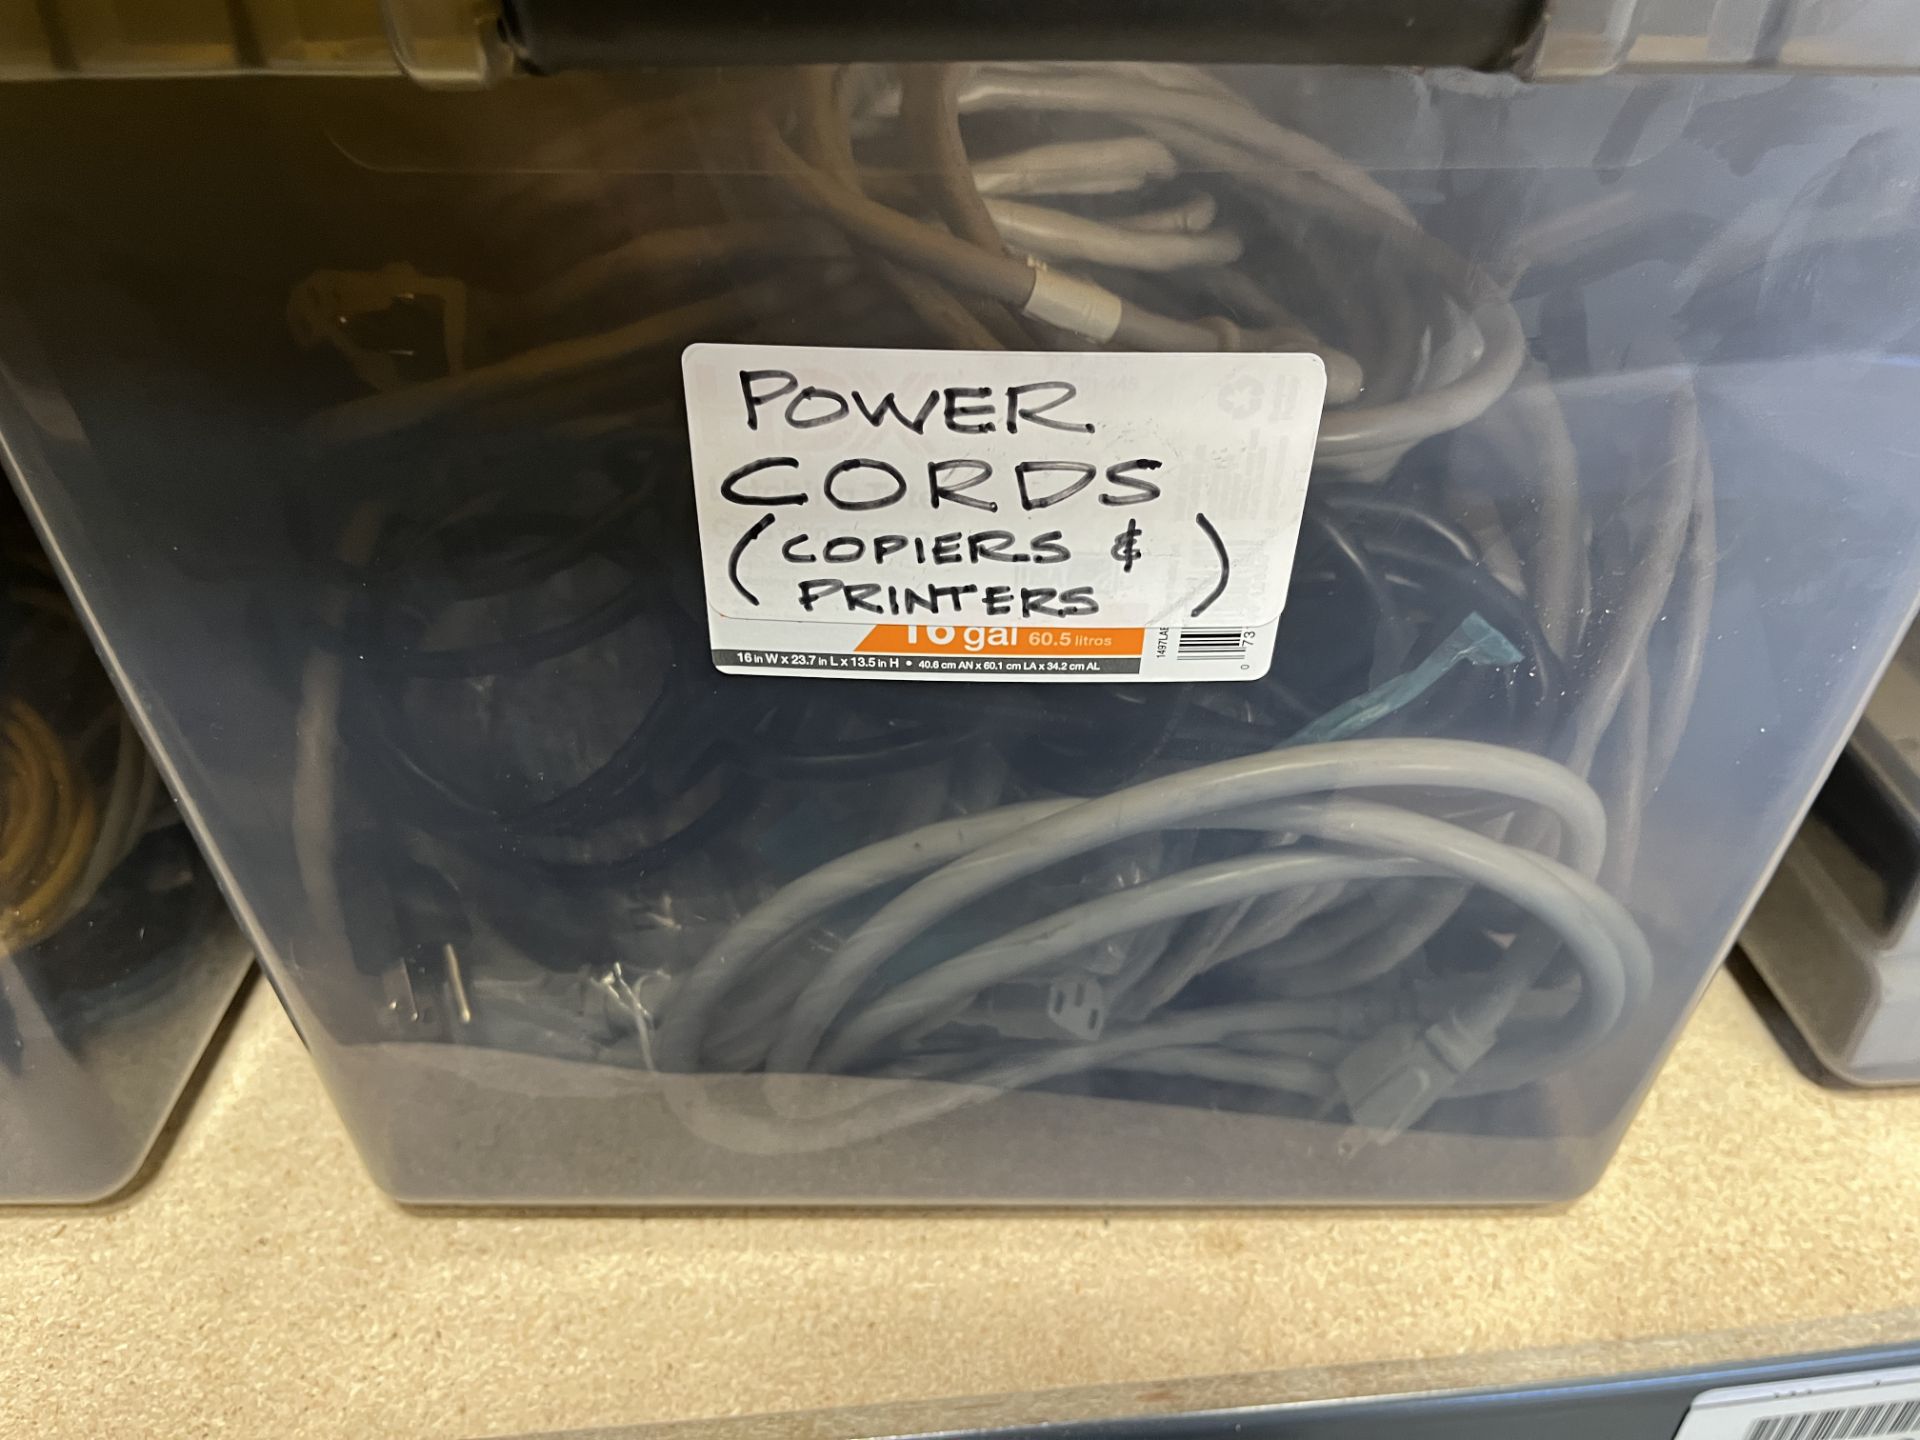 6 PLASTIC BINS OF CABLES, POWER CORDS, POWER FILTERS, ETC - Image 4 of 15